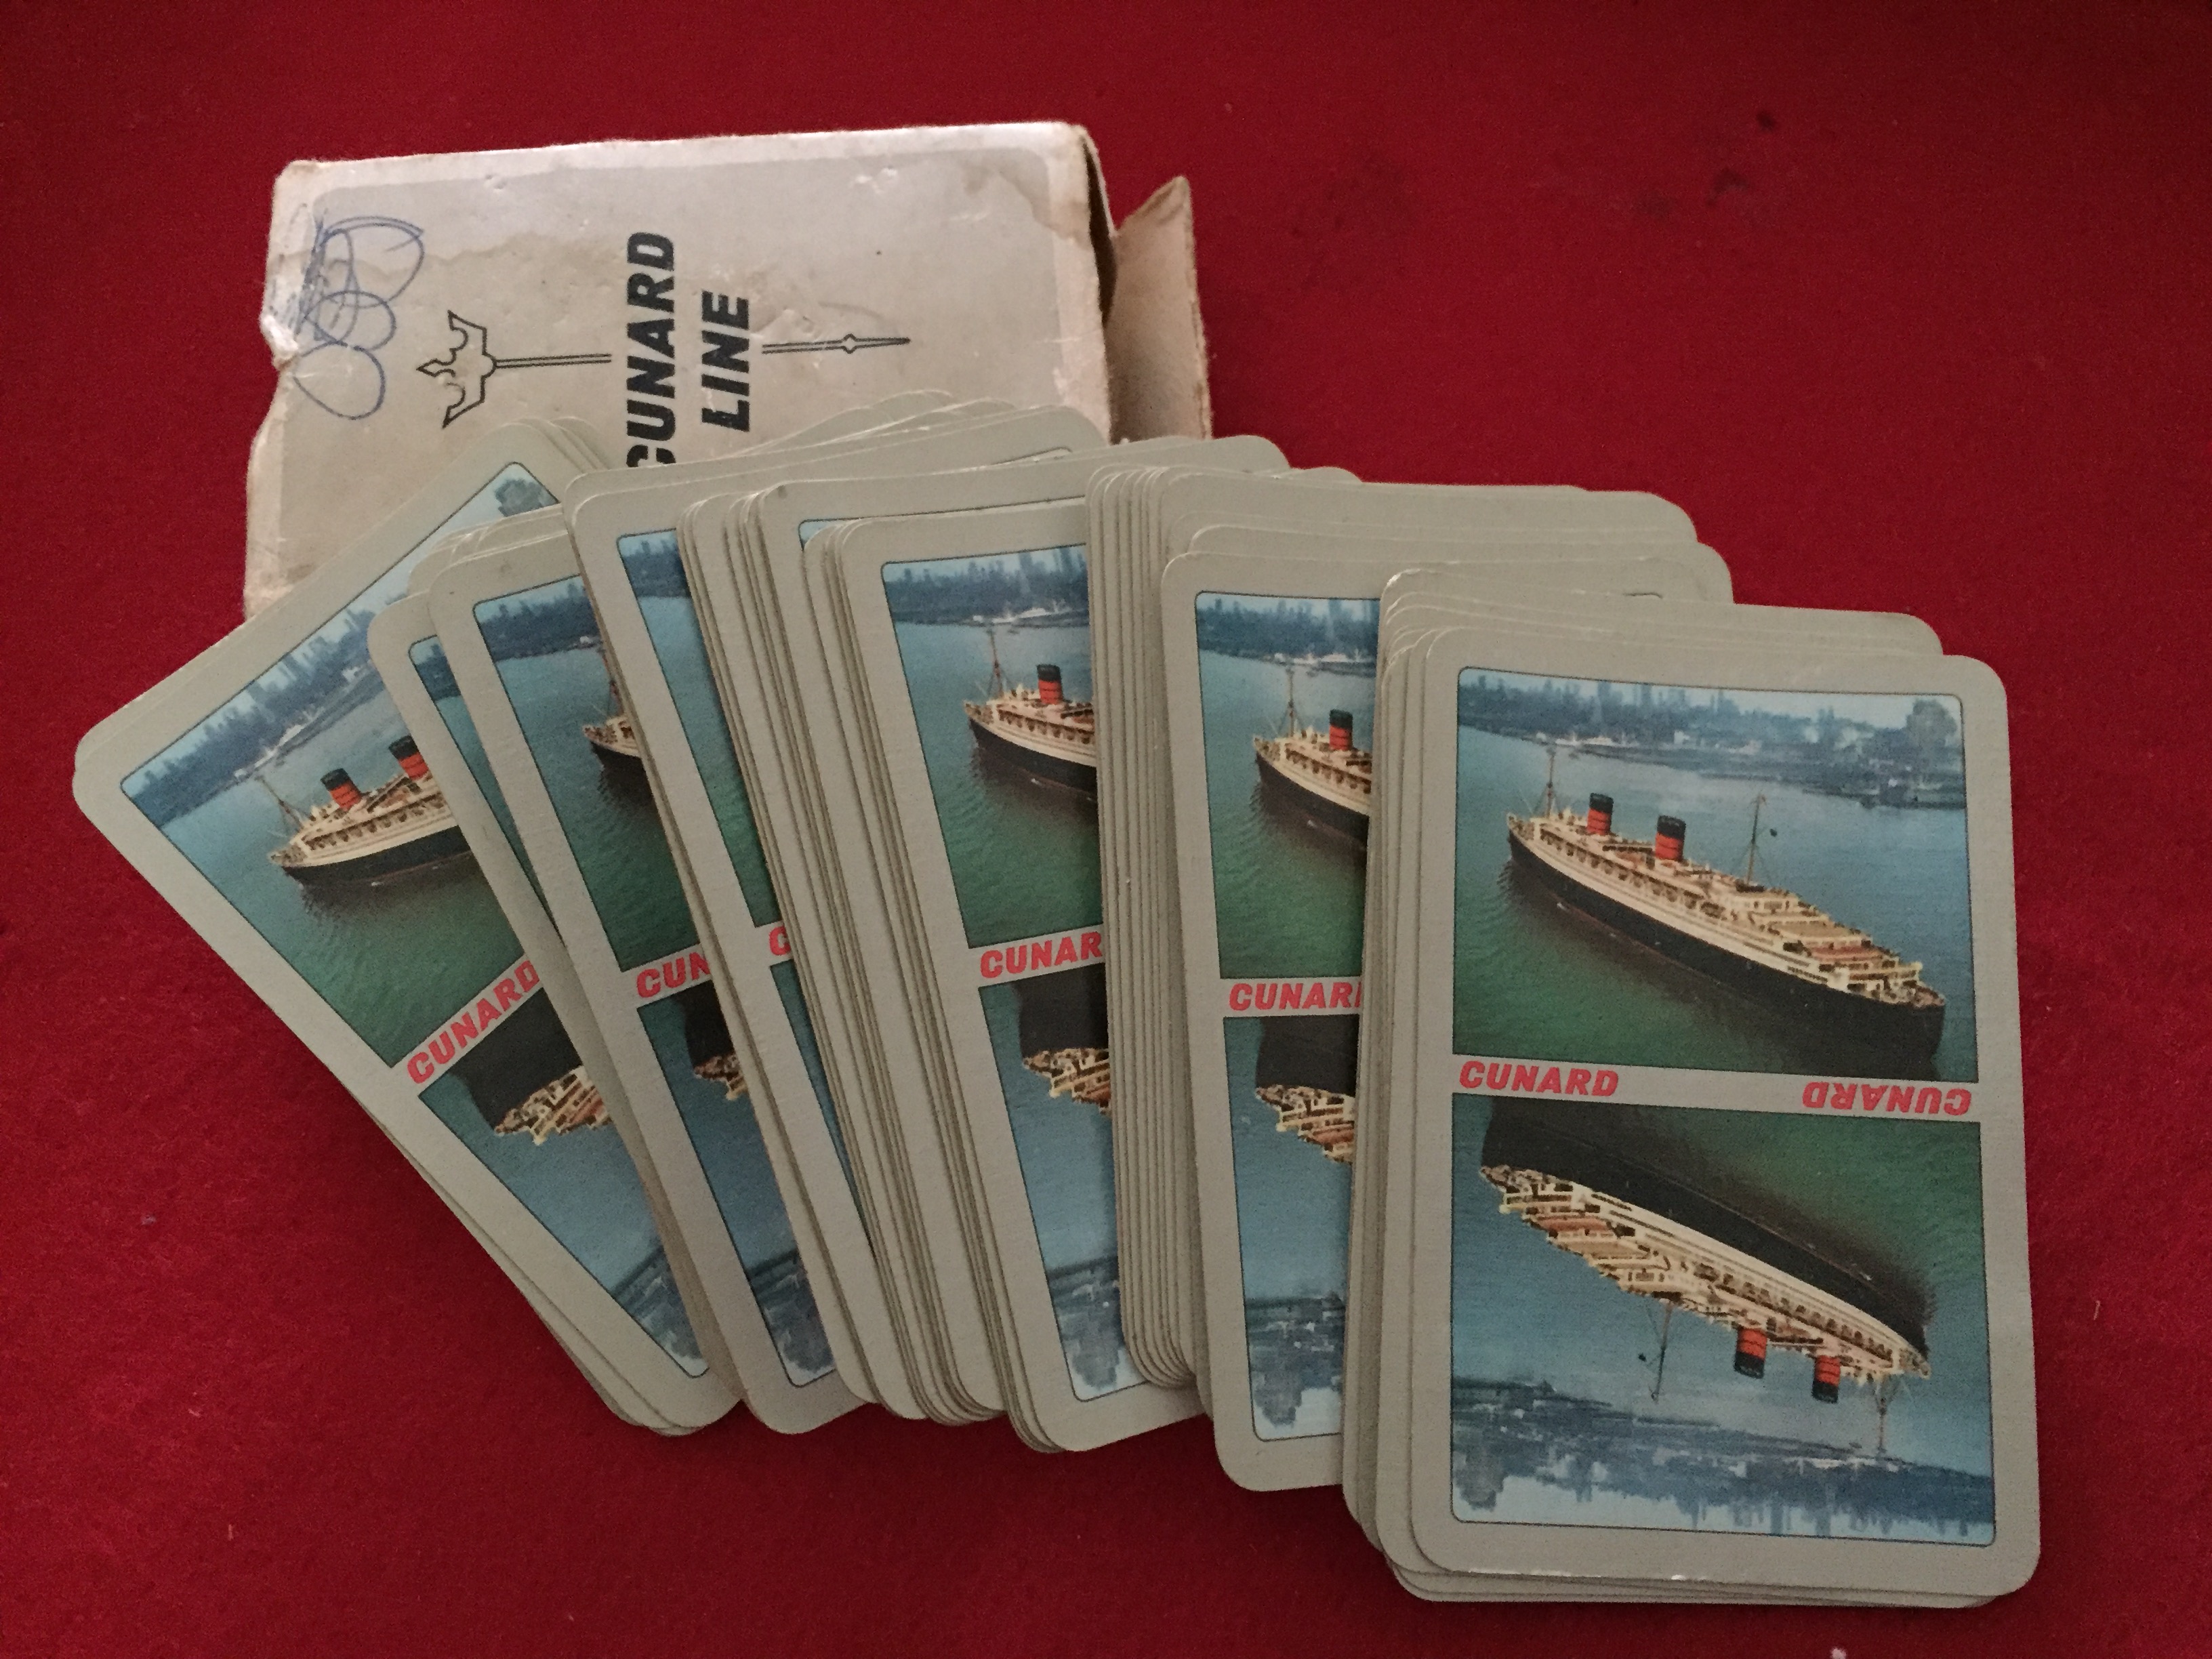 EARLY SOUVENIR SET OF PLAYING CARDS FROM THE ORIGINAL CUNARD LINE VESSEL THE QUEEN ELIZABETH 